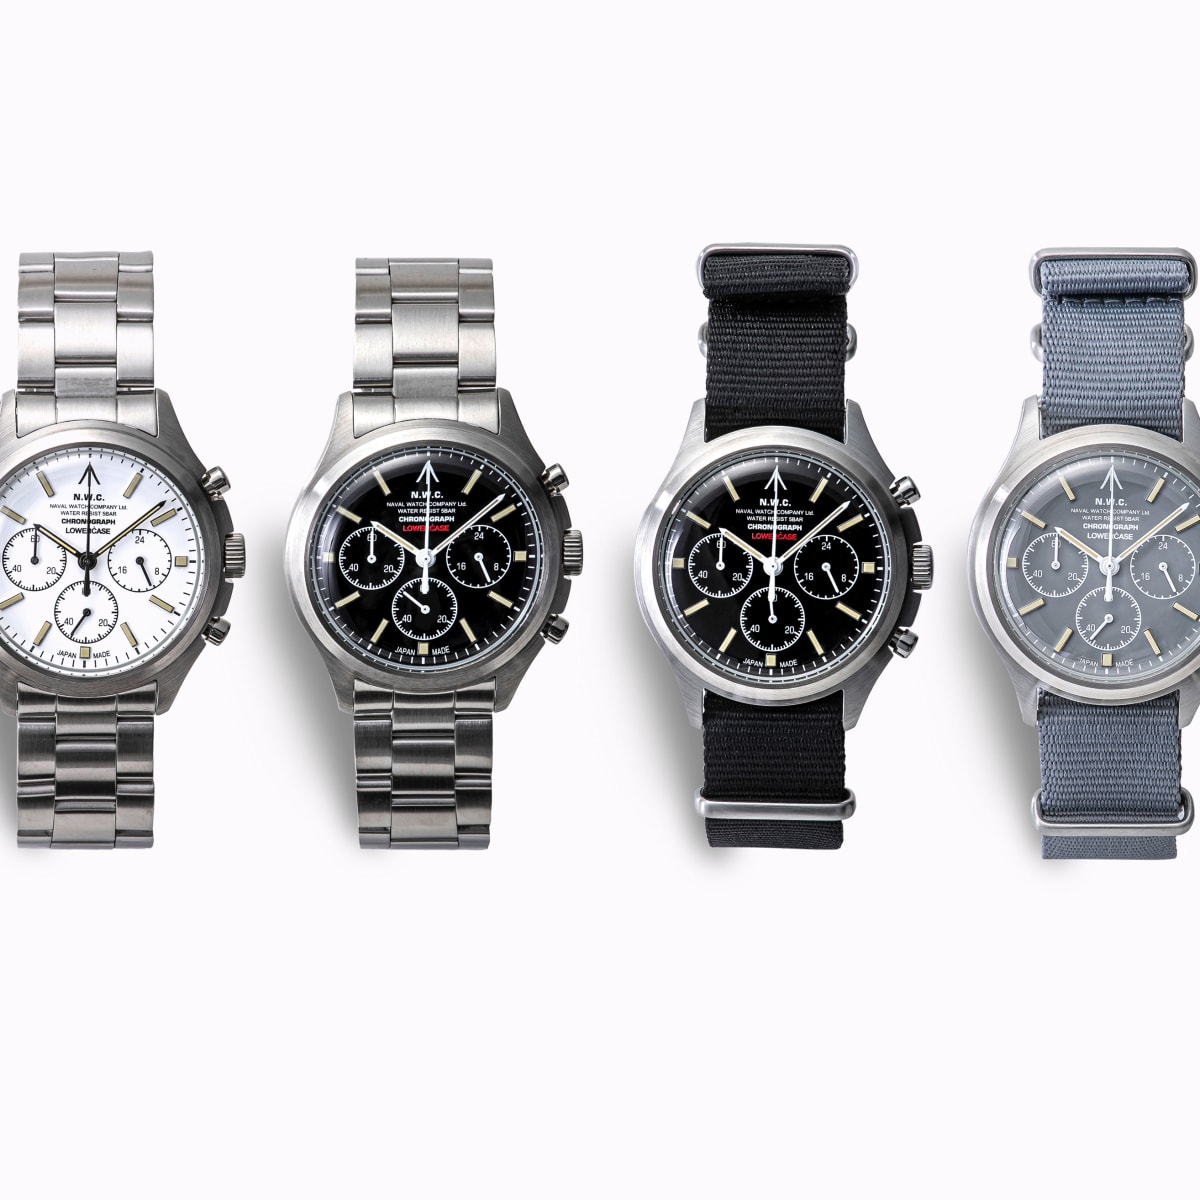 Naval Watch and Lowercase release their new chronograph collection